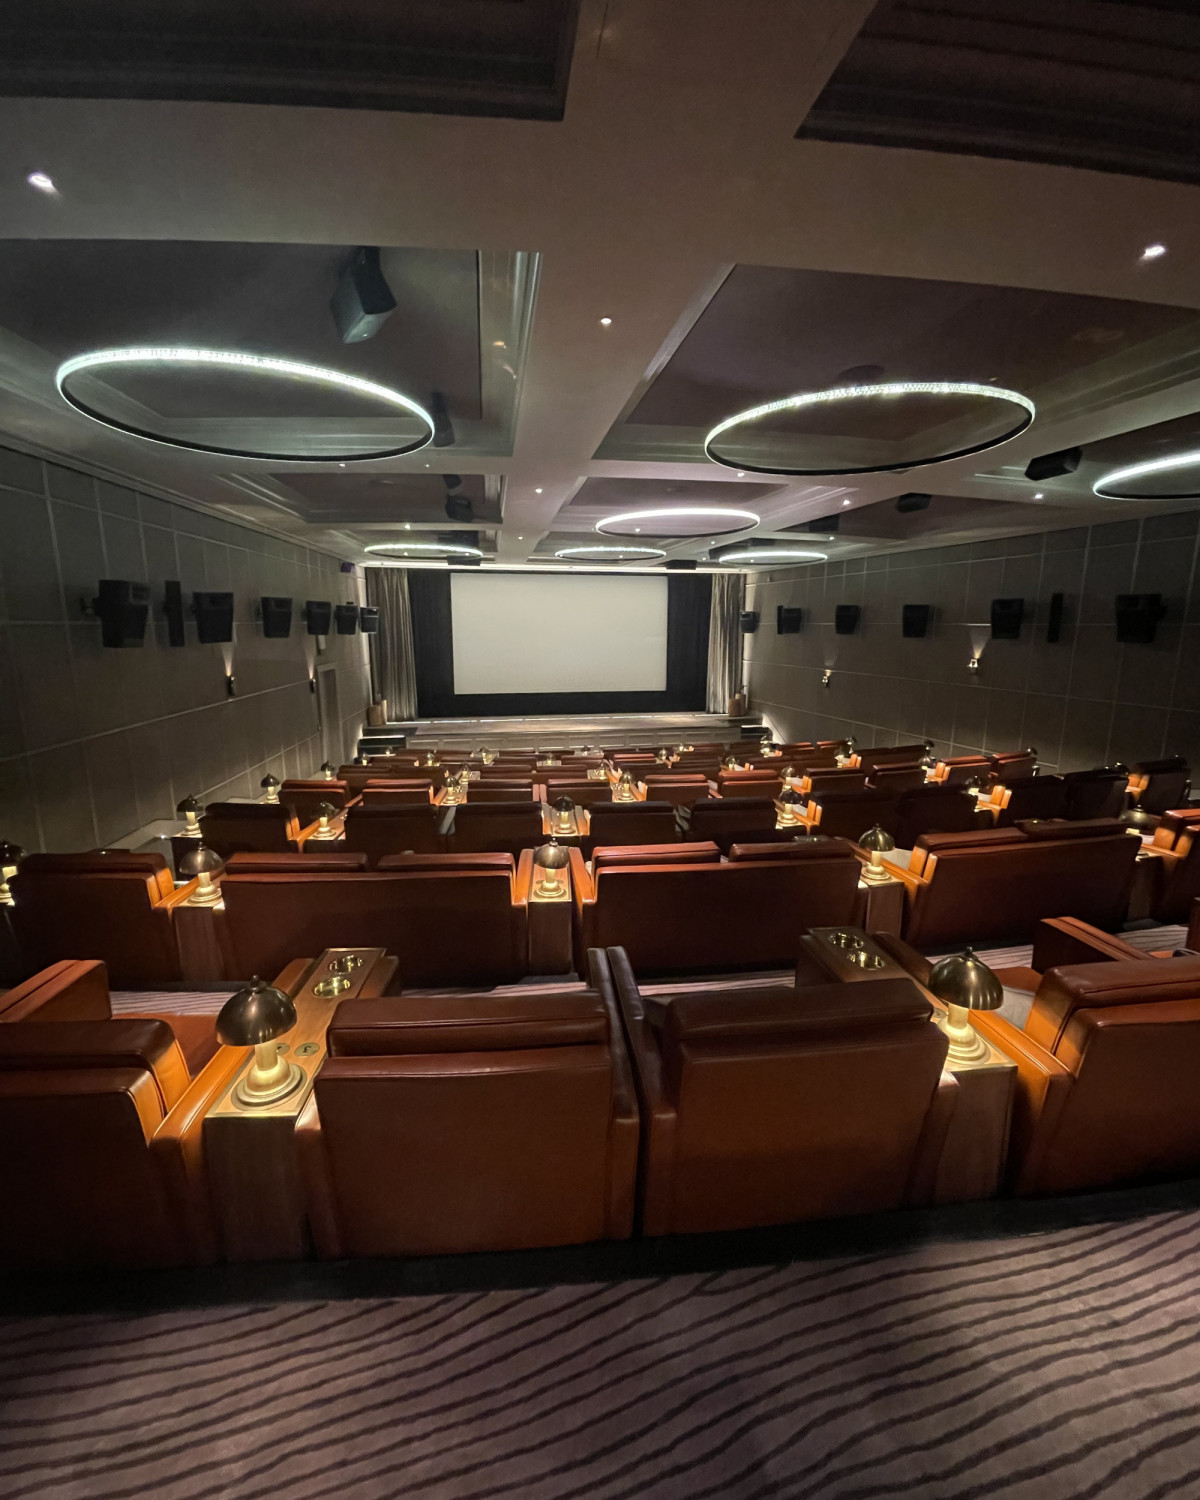 Theater room with large leather chairs and a screen